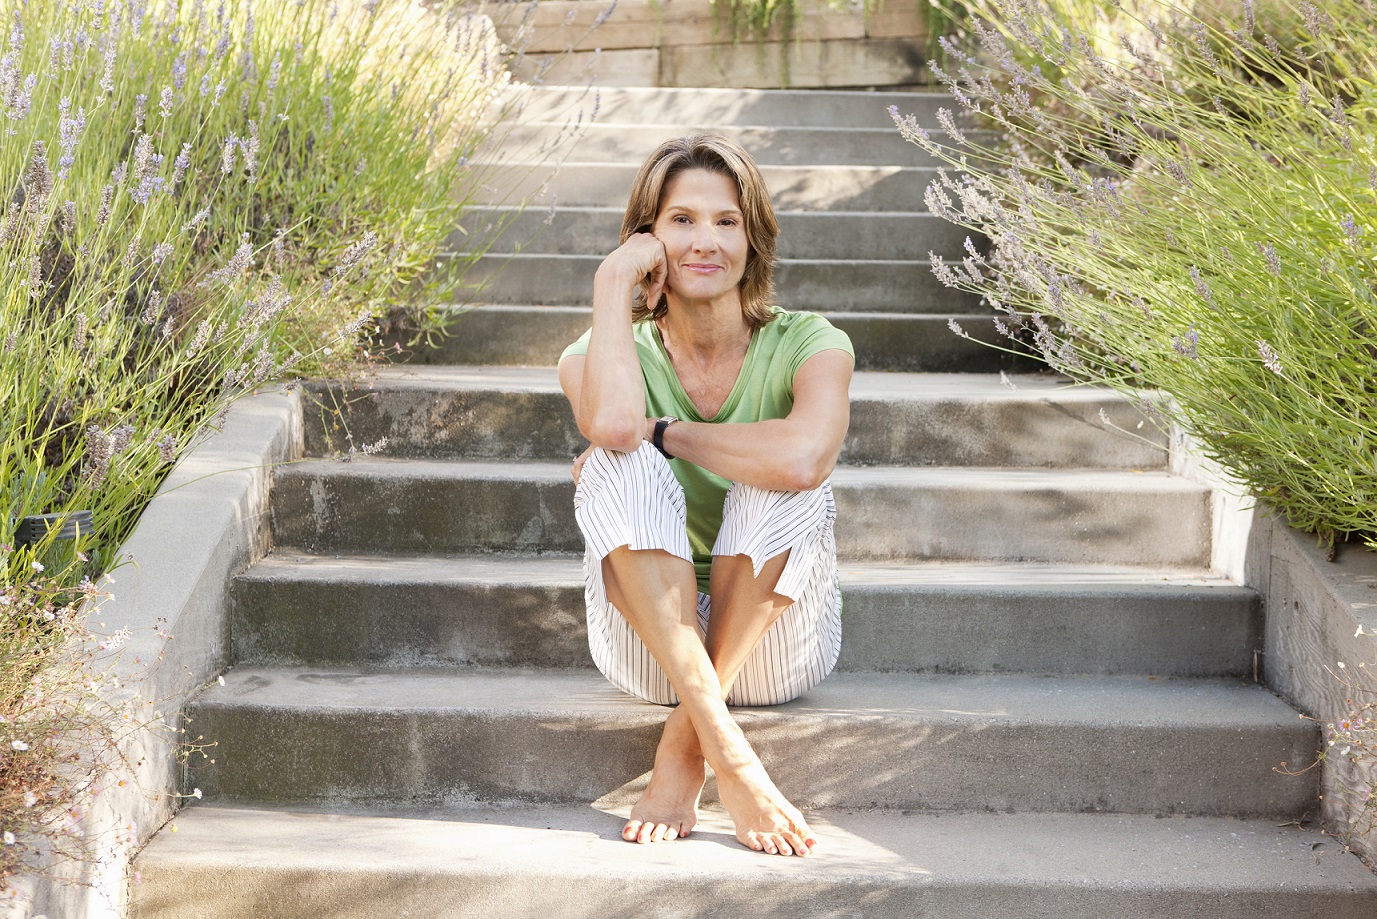 Smiling woman sitting barefoot on cement steps.